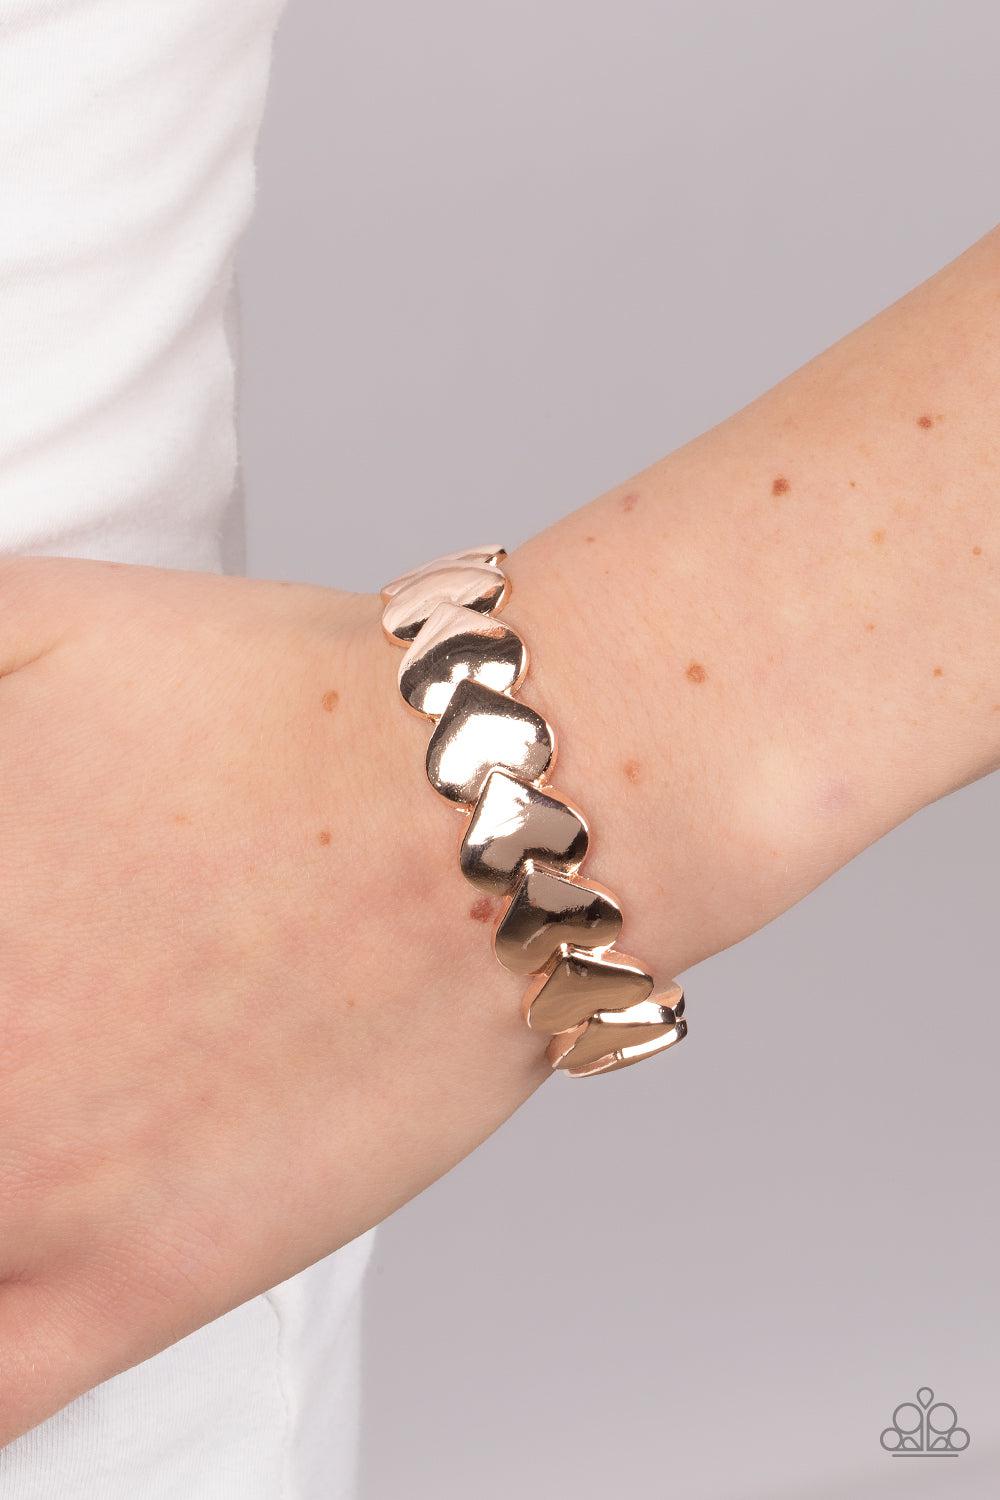 Hearts Galore Rose Gold Cuff Bracelet - Paparazzi Accessories-on model - CarasShop.com - $5 Jewelry by Cara Jewels